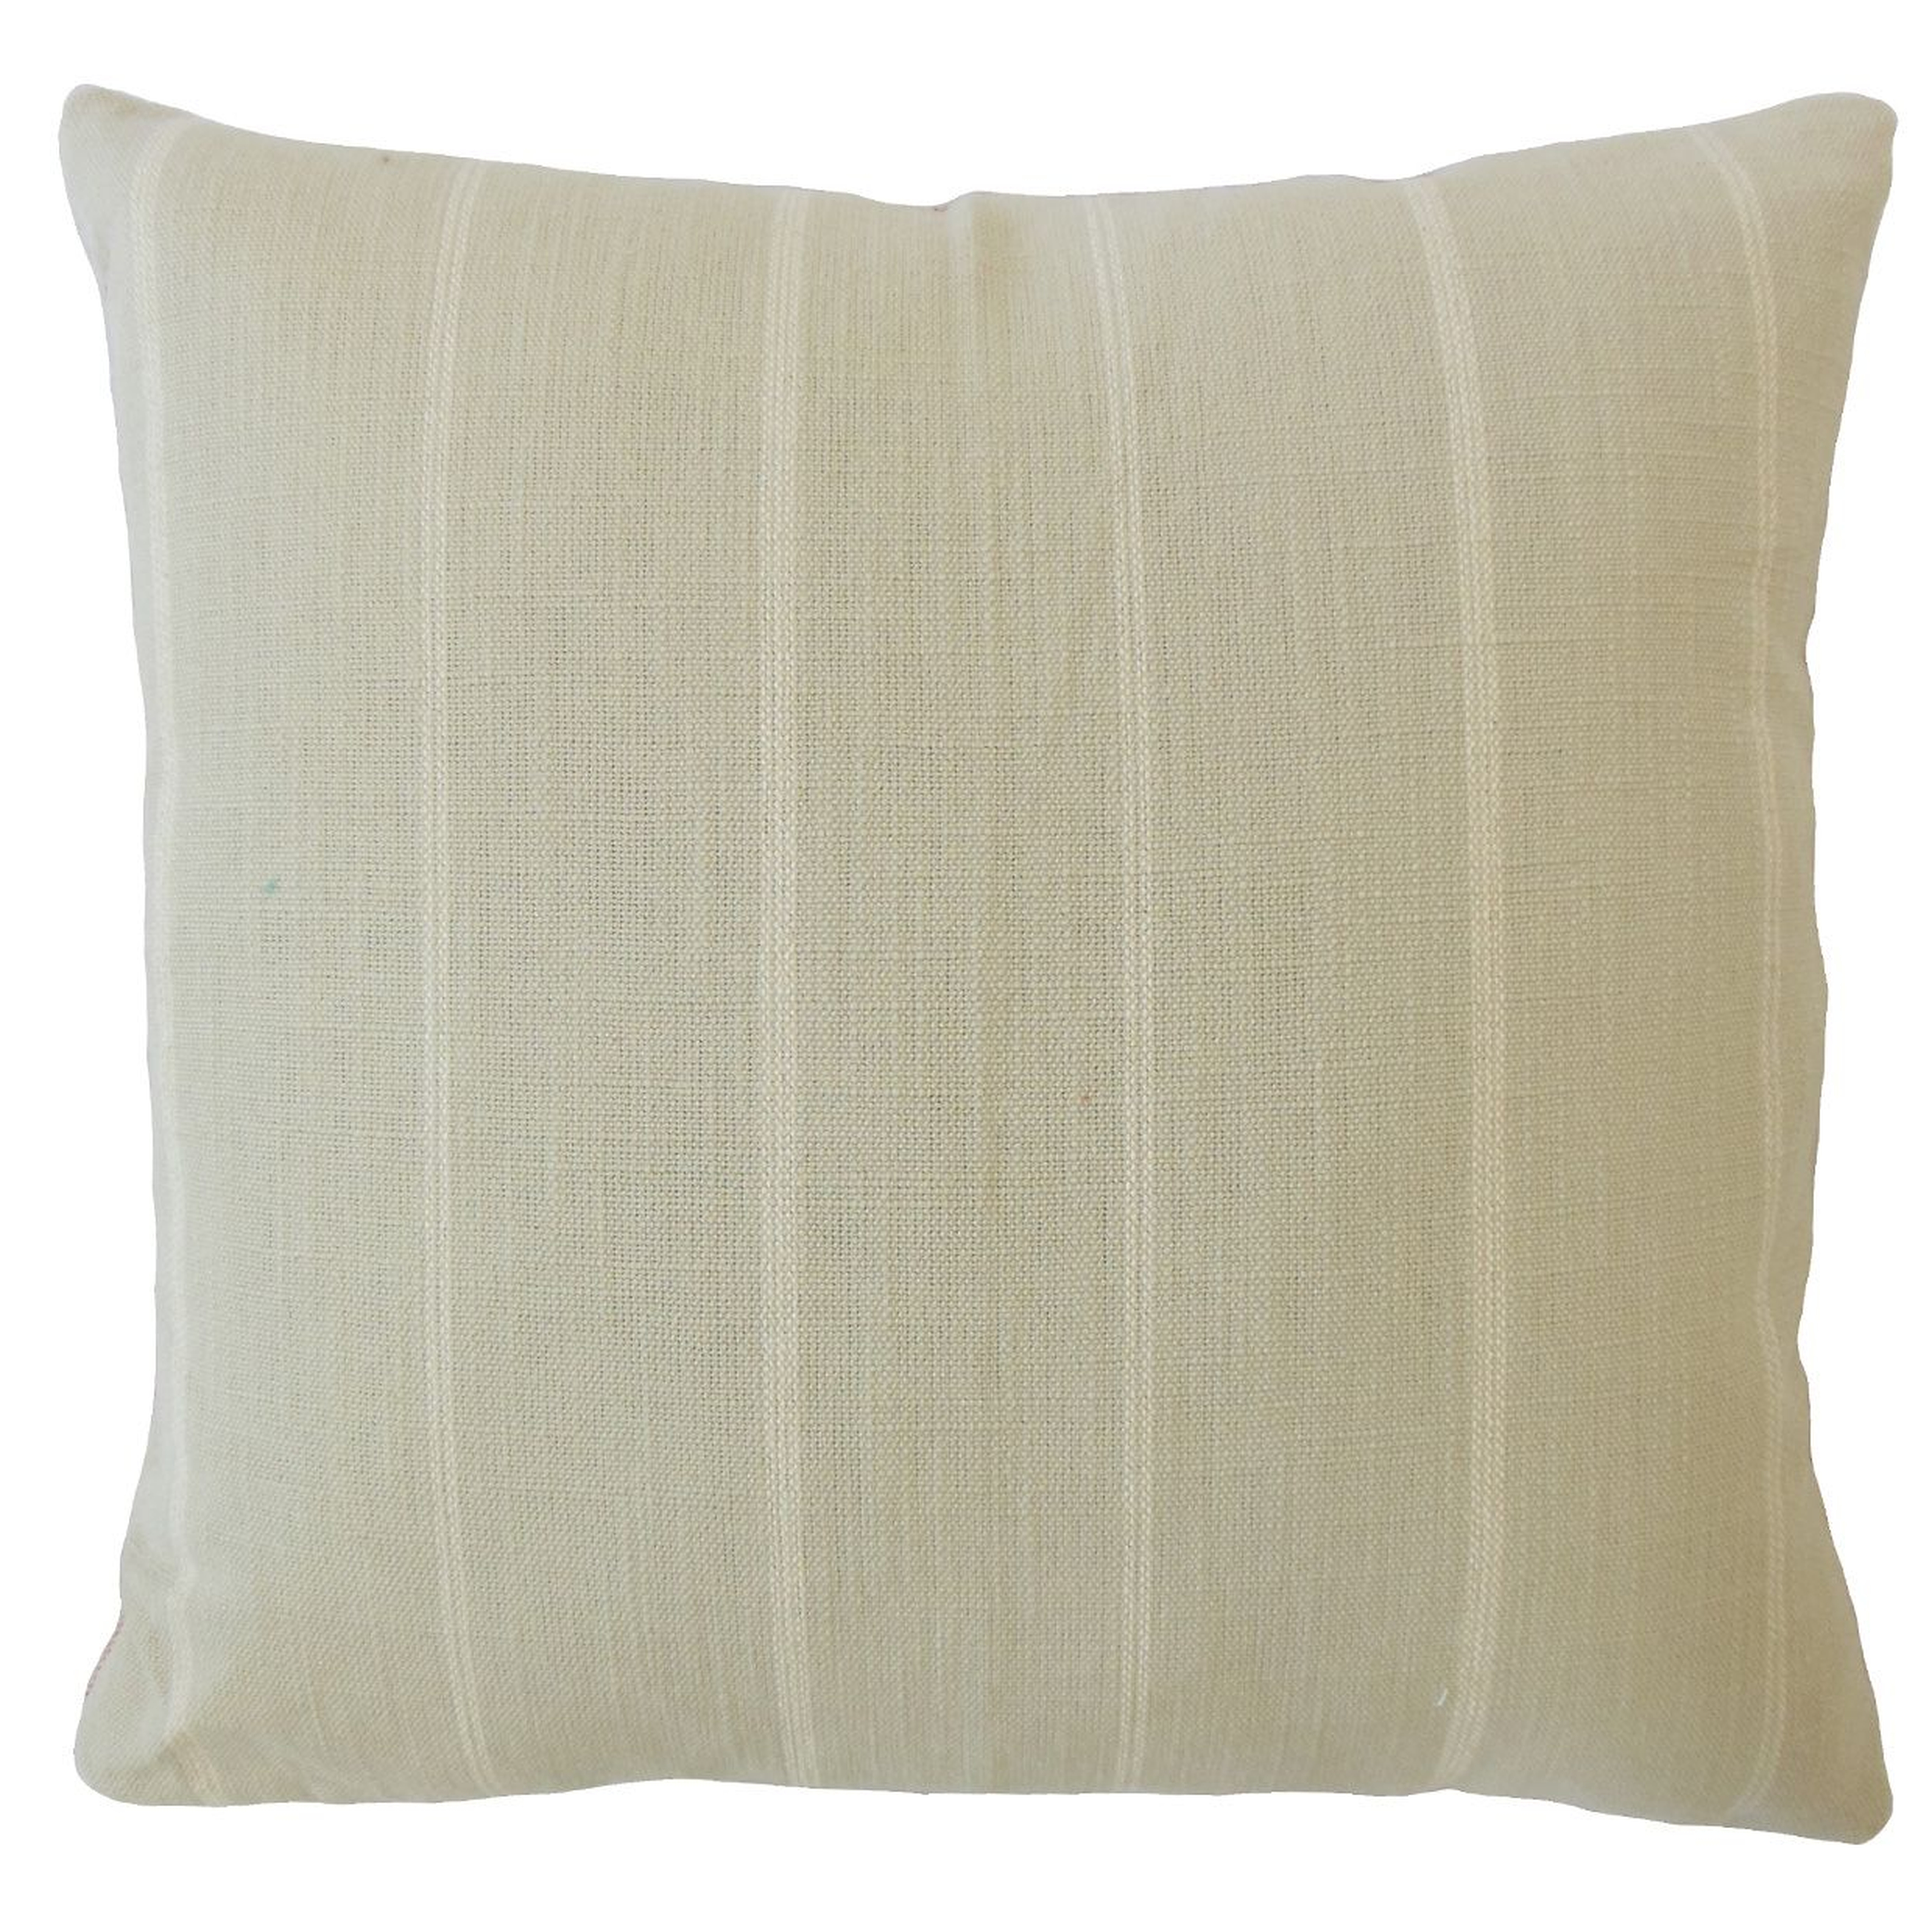 Tailored Stripe Pillow, Dove, 18" x 18" - Havenly Essentials